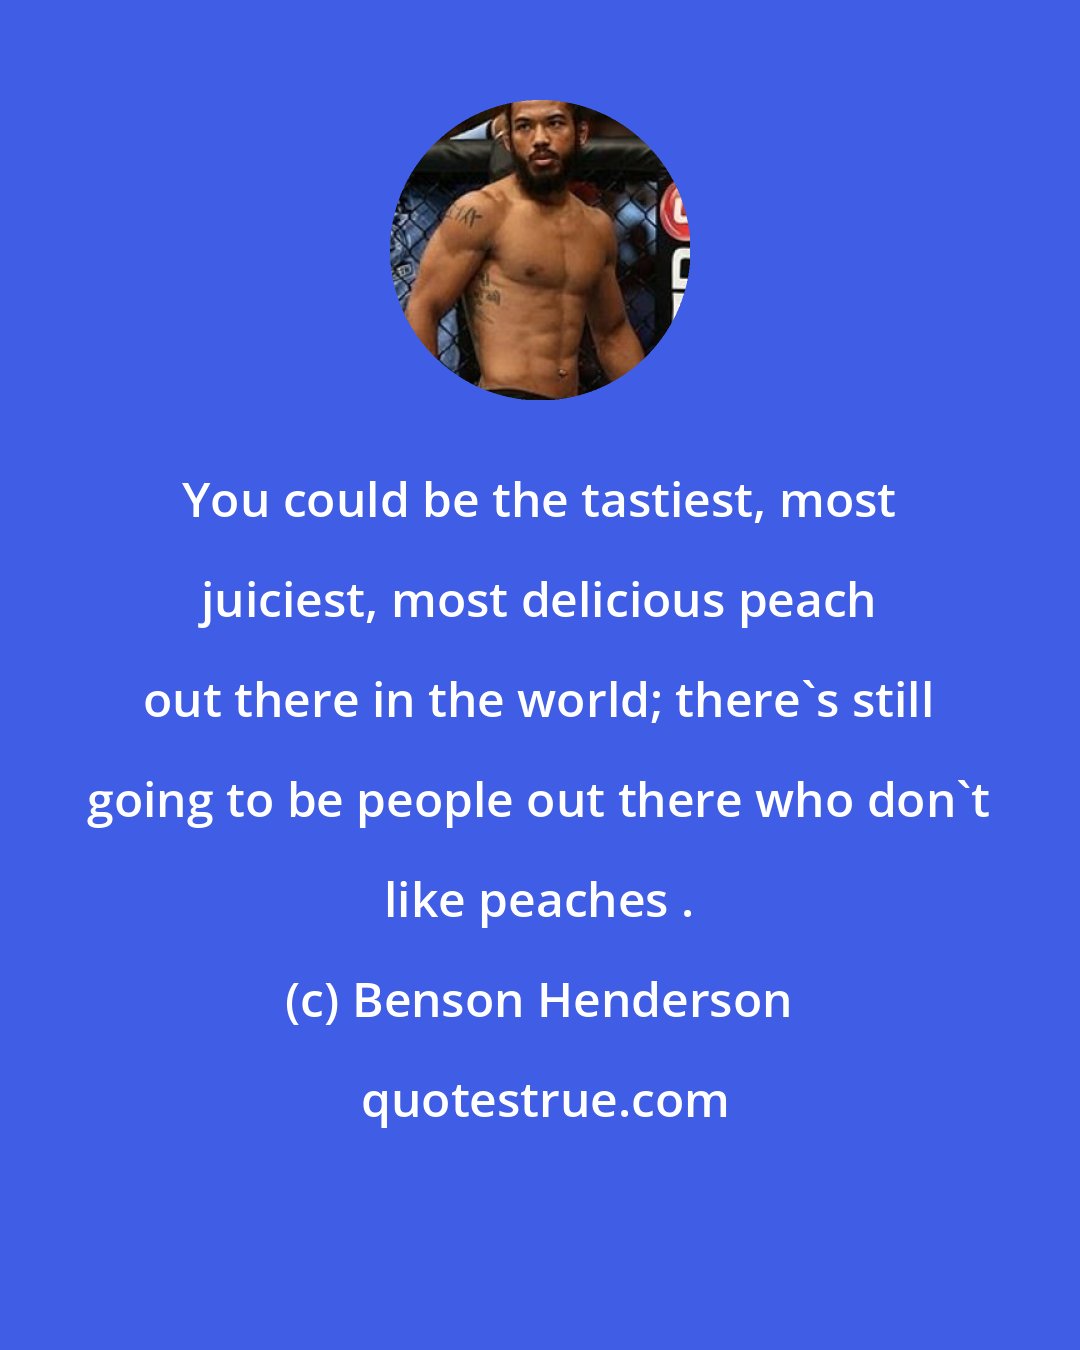 Benson Henderson: You could be the tastiest, most juiciest, most delicious peach out there in the world; there's still going to be people out there who don't like peaches .